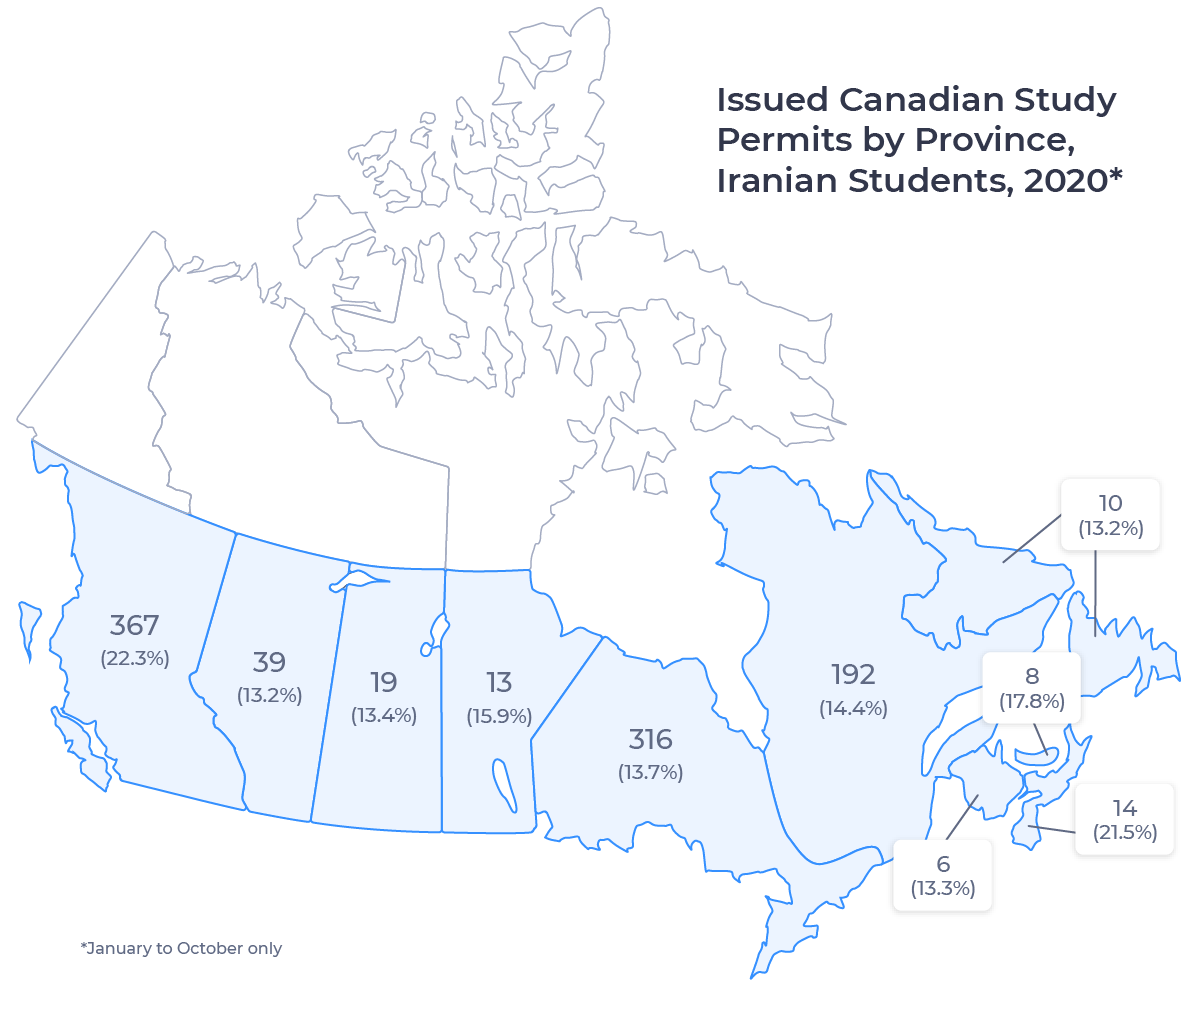 Map of Canada showing issued study permit numbers for Iranian students in 2020 (Jan-Oct)